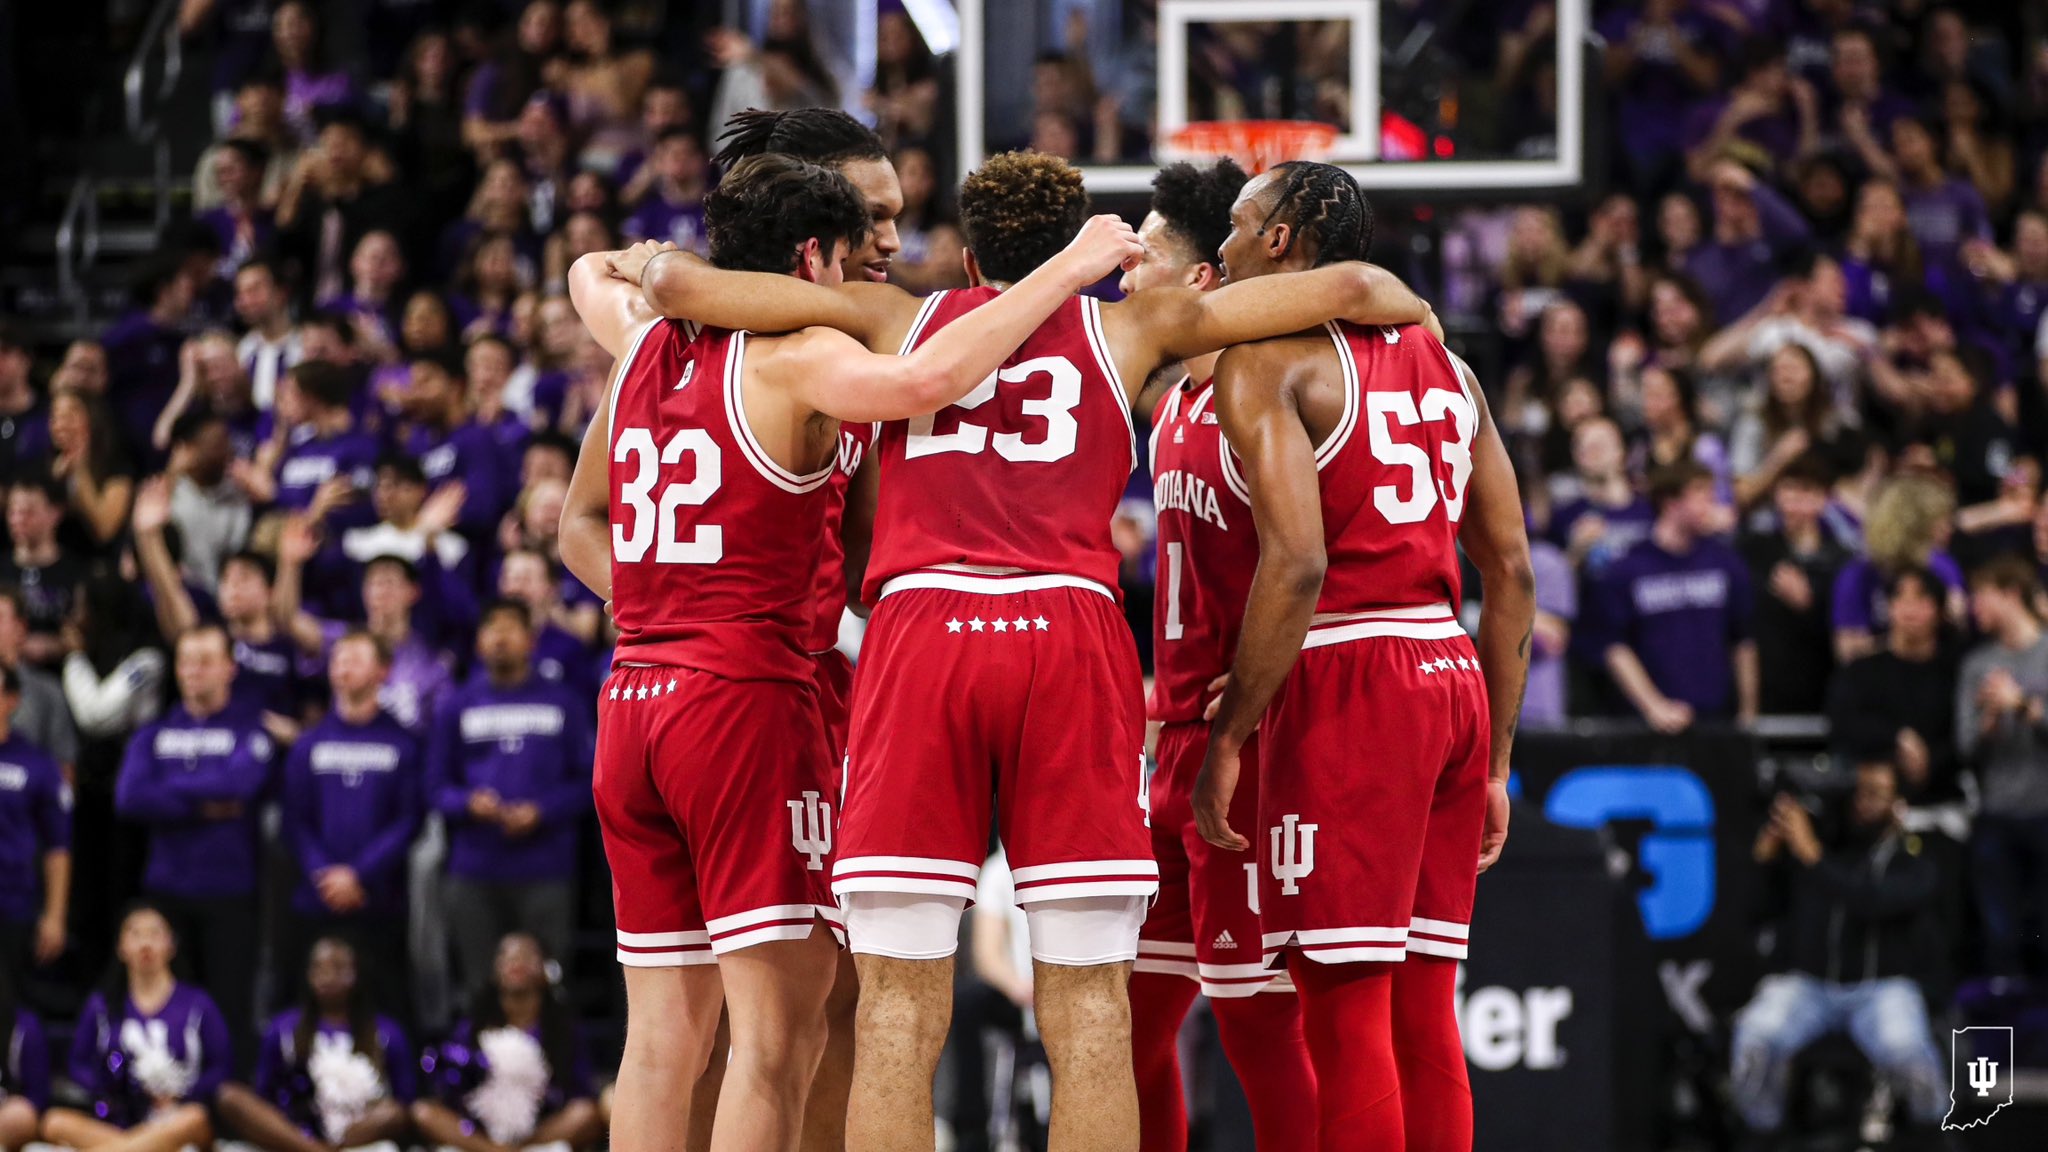 Insignificante comprar Del Sur Indiana Basketball on Twitter: "You up? 👀 We've hit the last 4 of 4. TJD  has scored our last 7 points. Northwestern 58, #IUBB 56 | 2:35 2H  https://t.co/pIQhCg4NLH" / Twitter